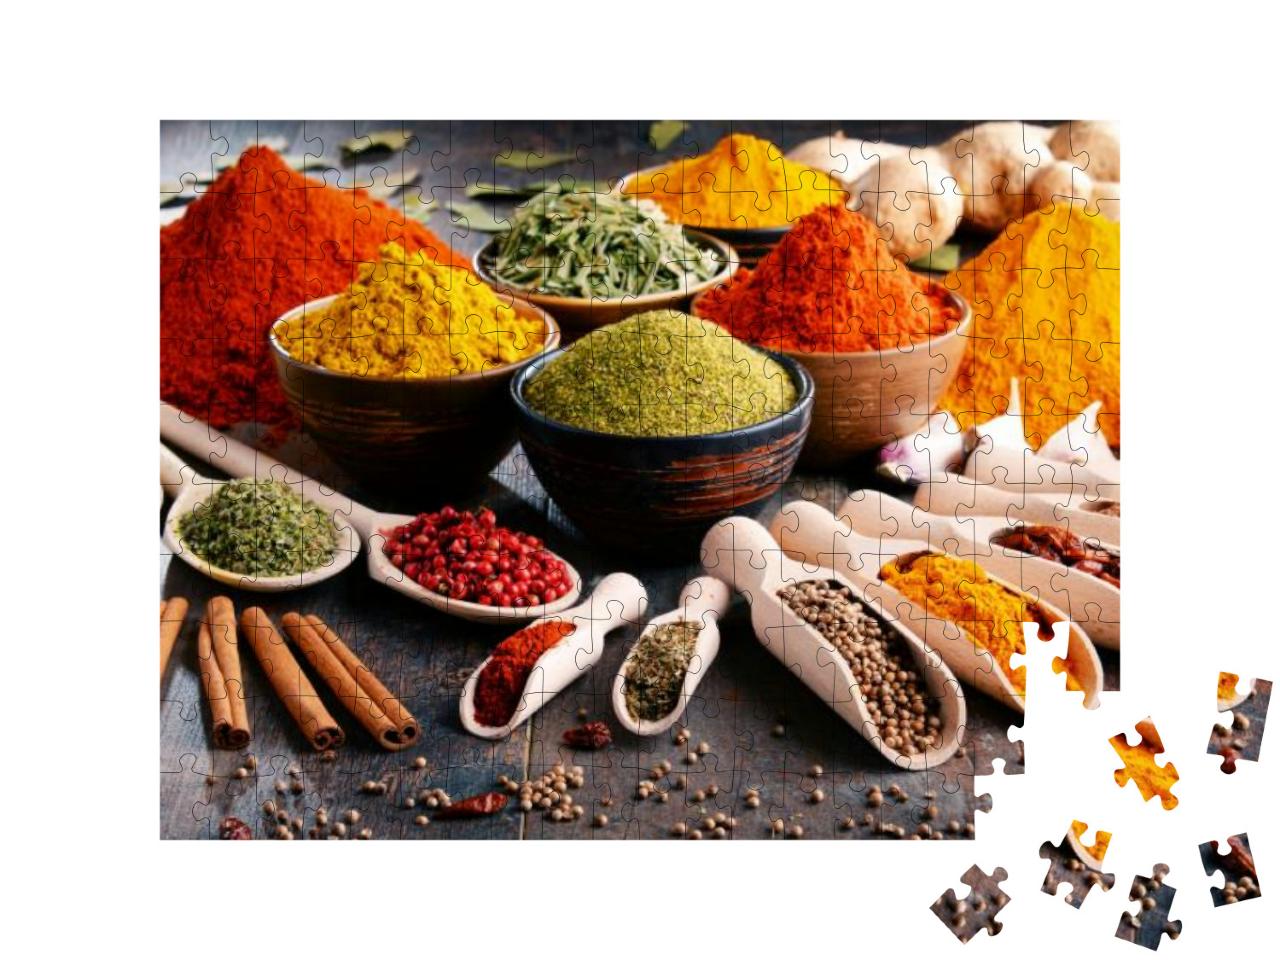 Variety of Spices & Herbs on Kitchen Table... Jigsaw Puzzle with 200 pieces